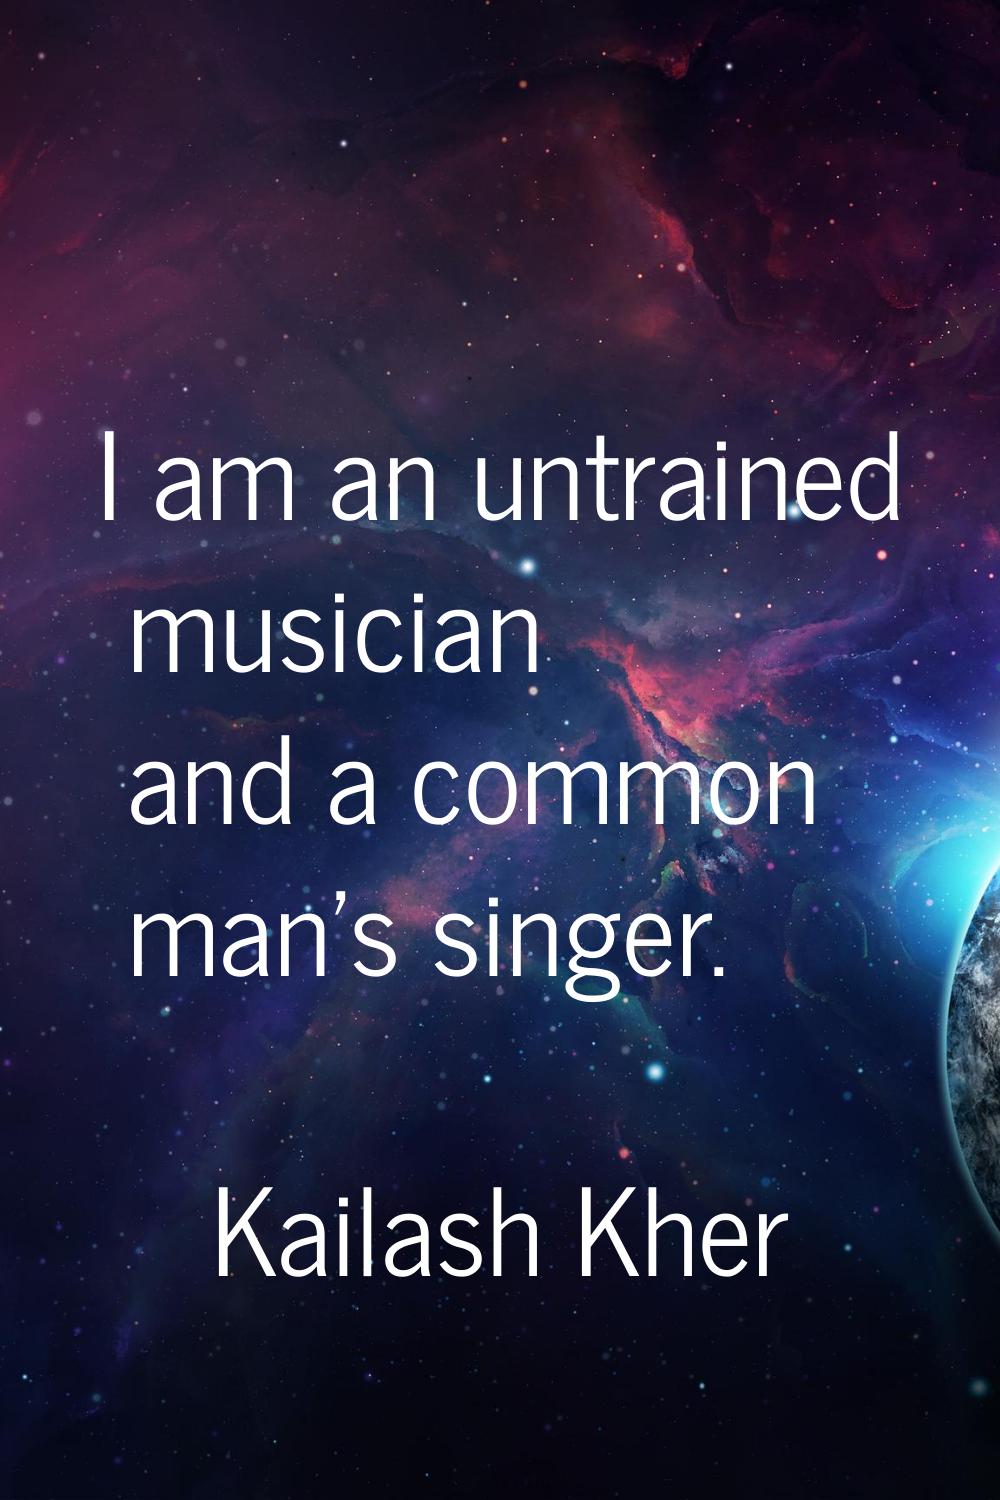 I am an untrained musician and a common man's singer.